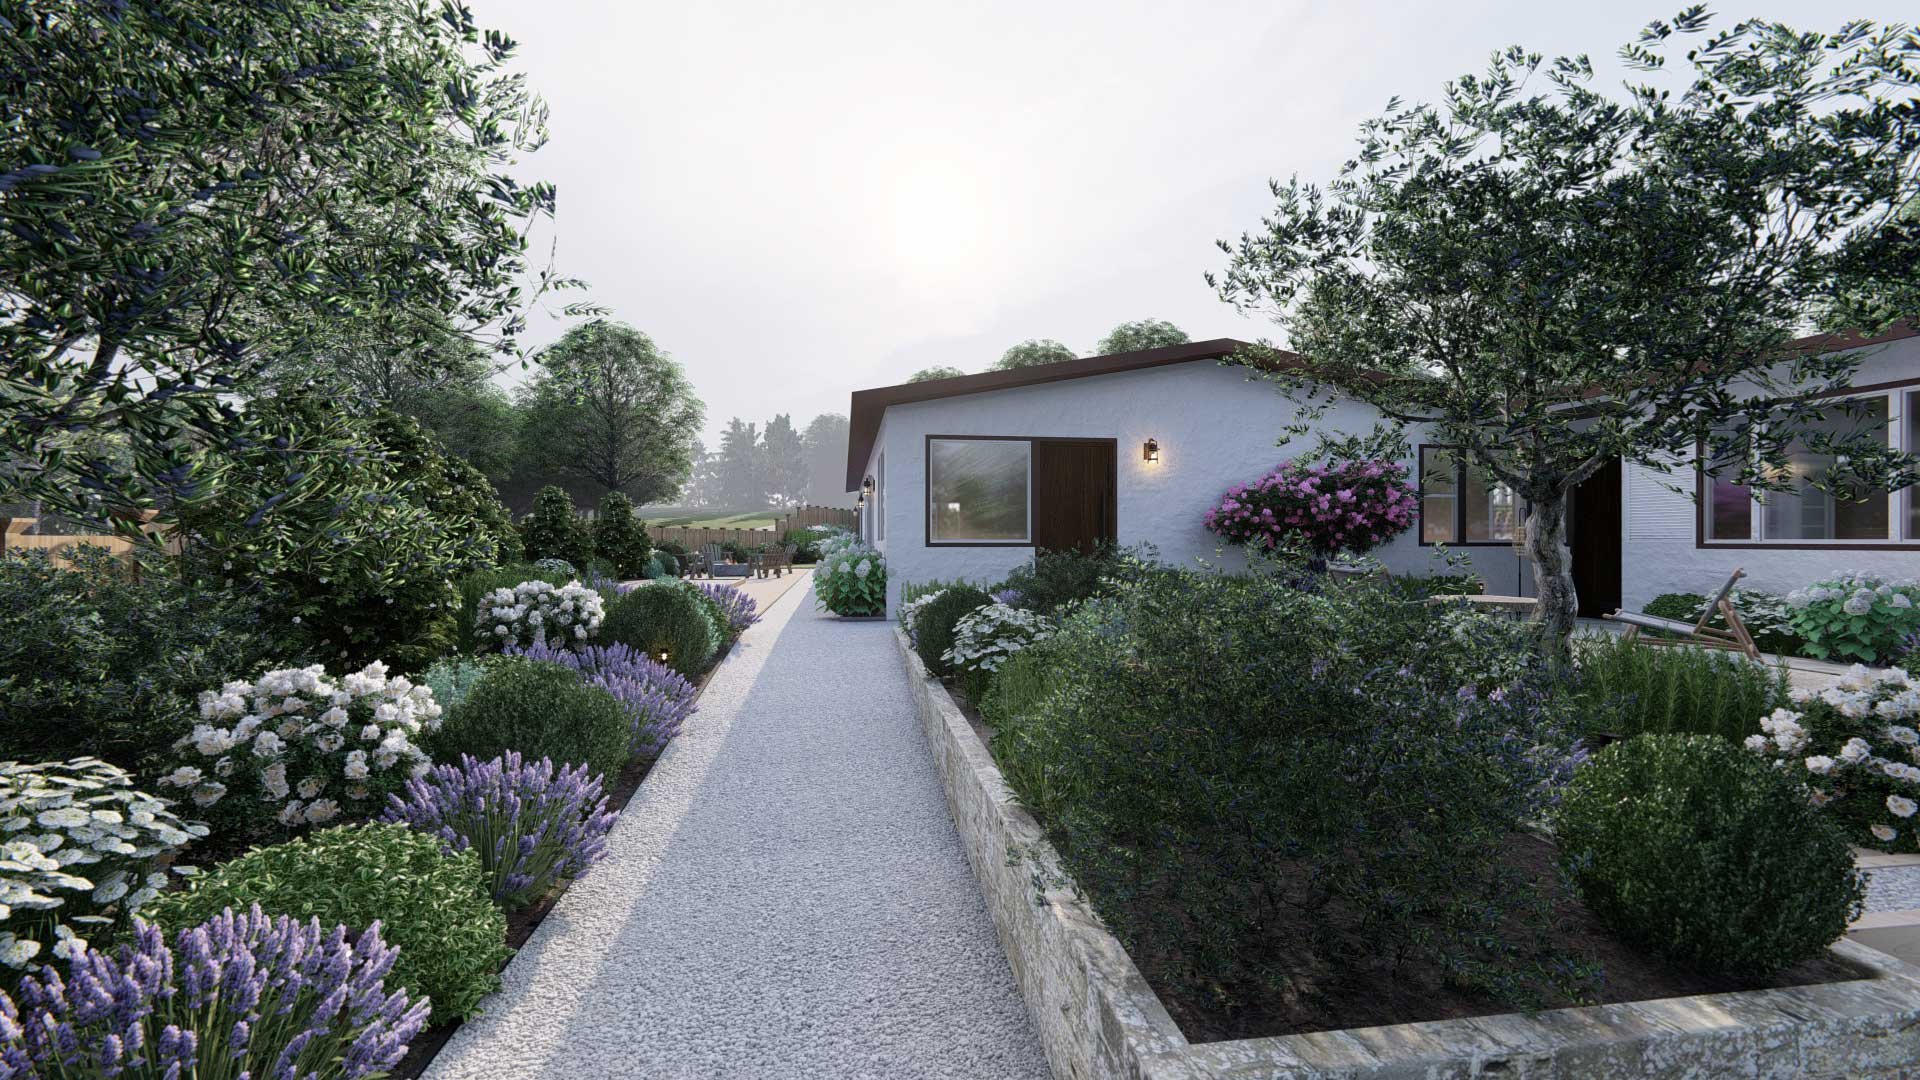  A repeating pattern of shrubs and blooms lends formality to the otherwise simple gravel path. 